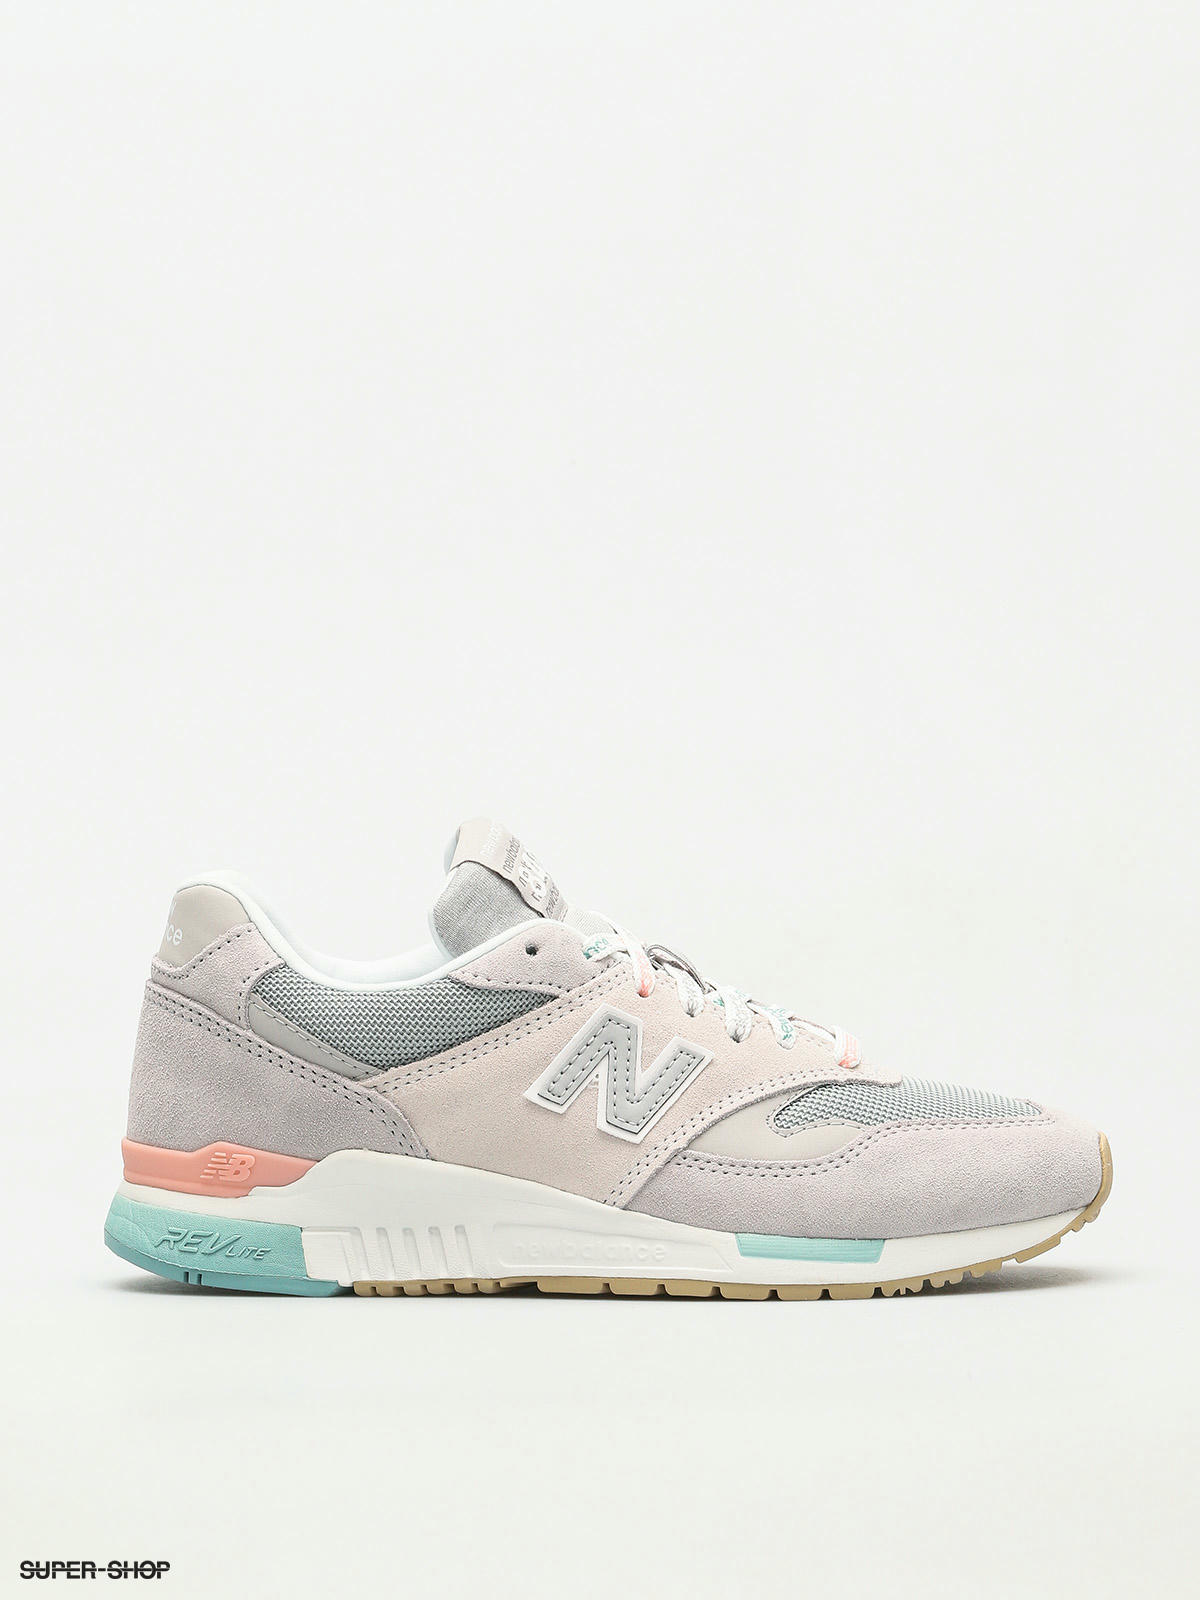 840 new balance shoes, OFF 77%,Buy!